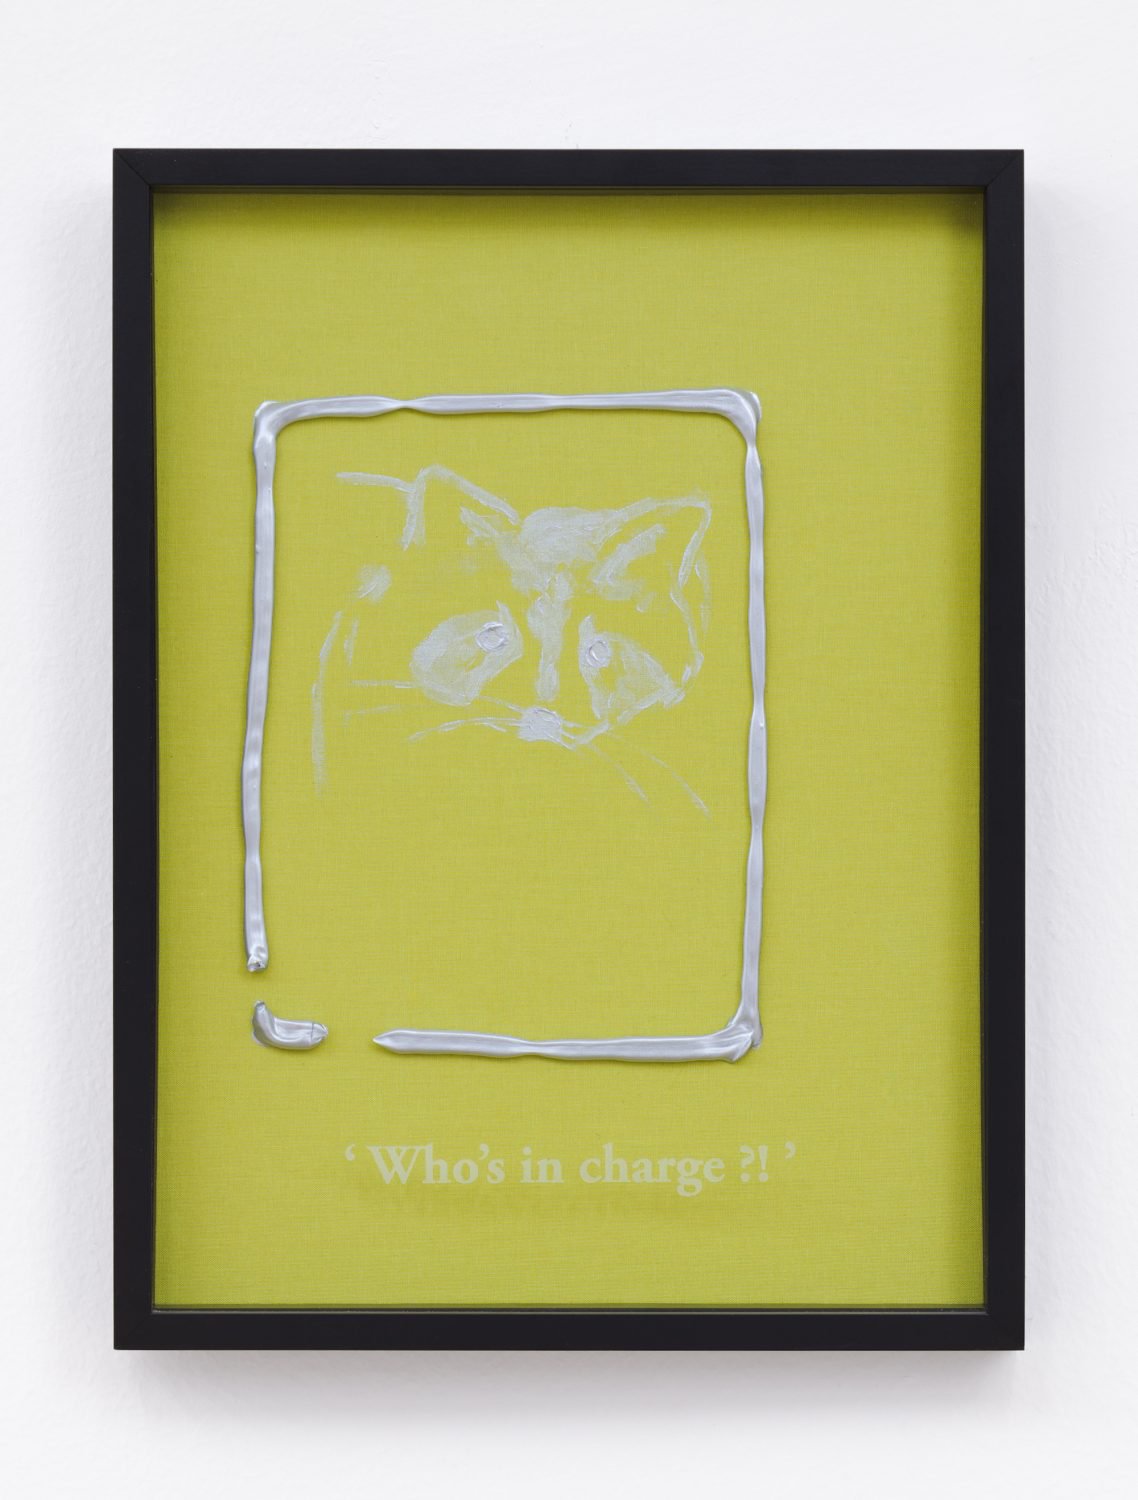 Philipp Timischl&quot;Who&#x27;s in charge?!&quot; (Lemon/Silver), 2017Acrylic on linen and glass-engraved object frame40.1 x 32.1 cm, unique